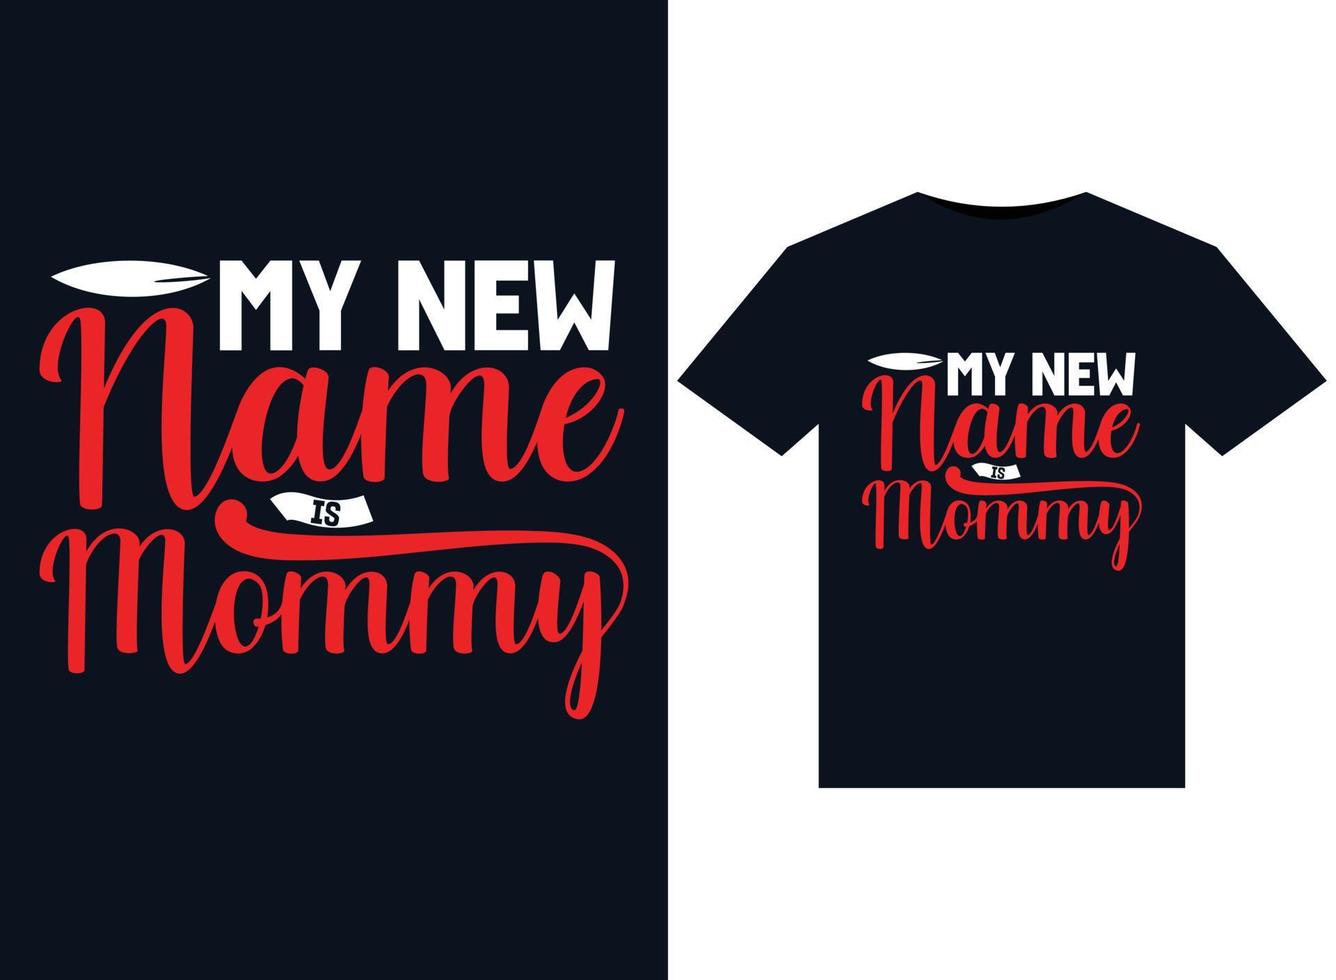 My New Name Is Mommy illustrations for print-ready T-Shirts design vector